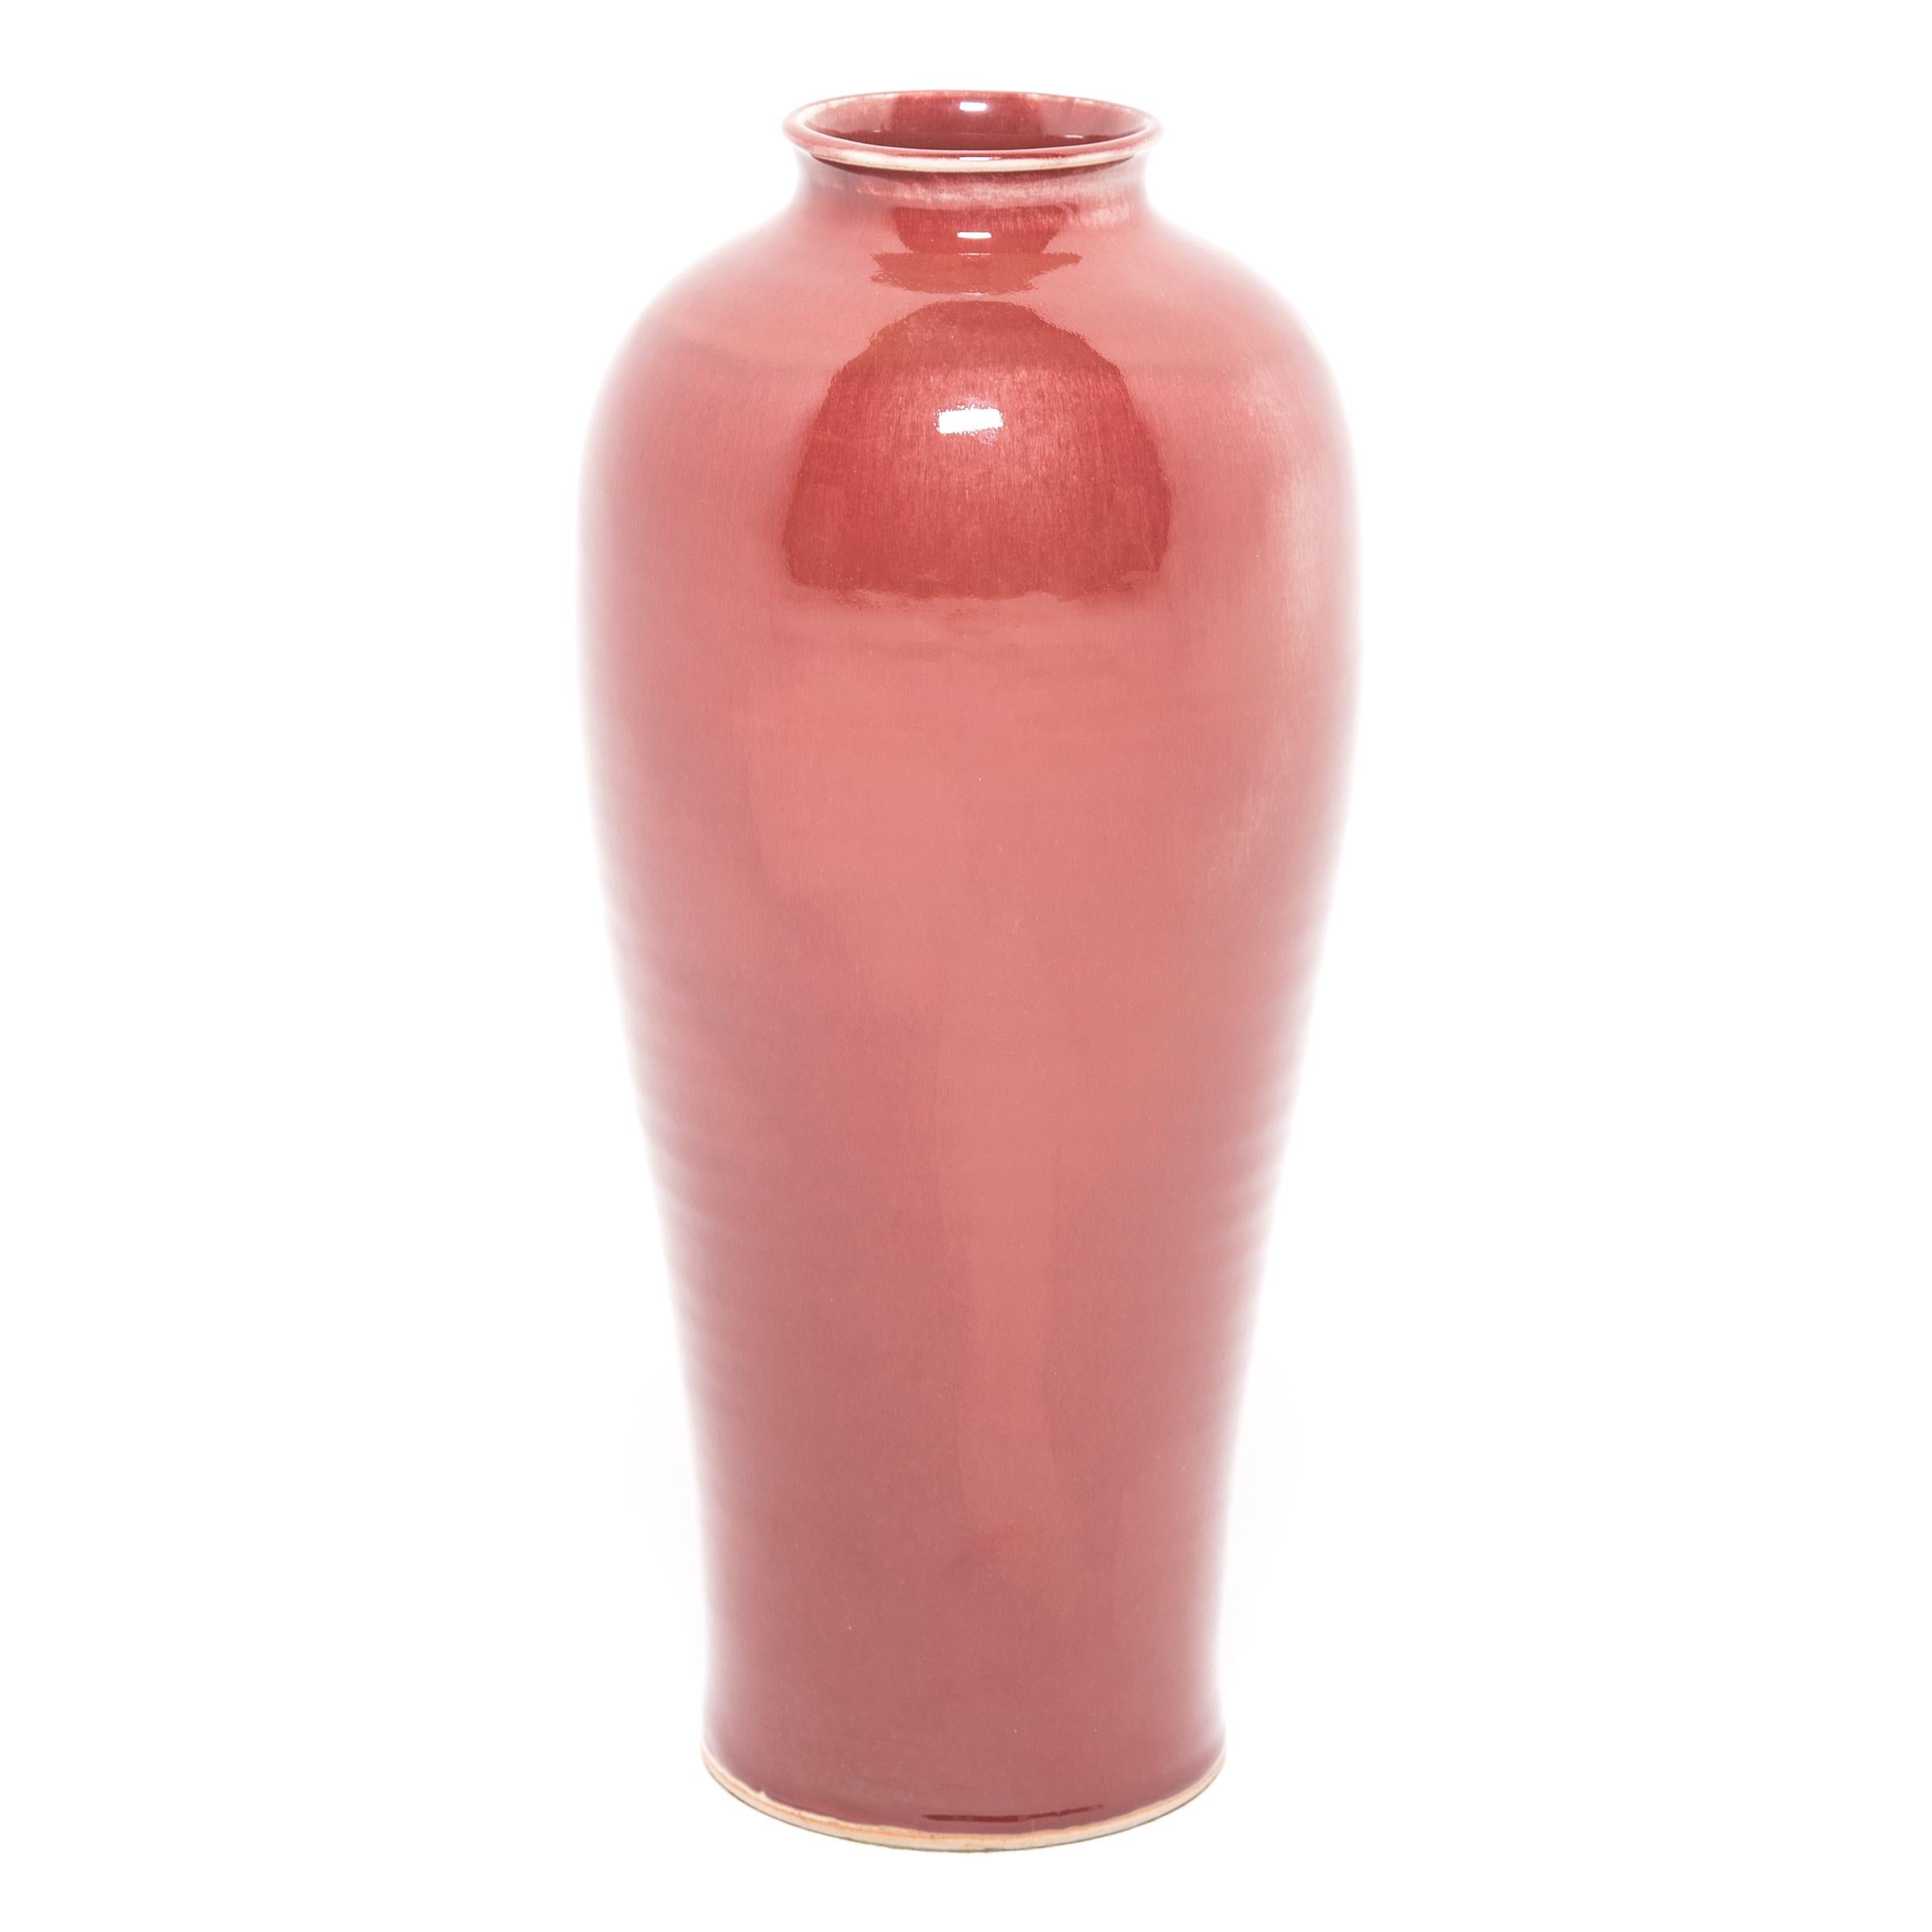 This simple yet stunning vase is sculpted in the traditional meiping vase form, historically used to hold the branches of plum trees, which are celebrated in China as symbols of strength. The tall vase's deep, rich red glaze is often called